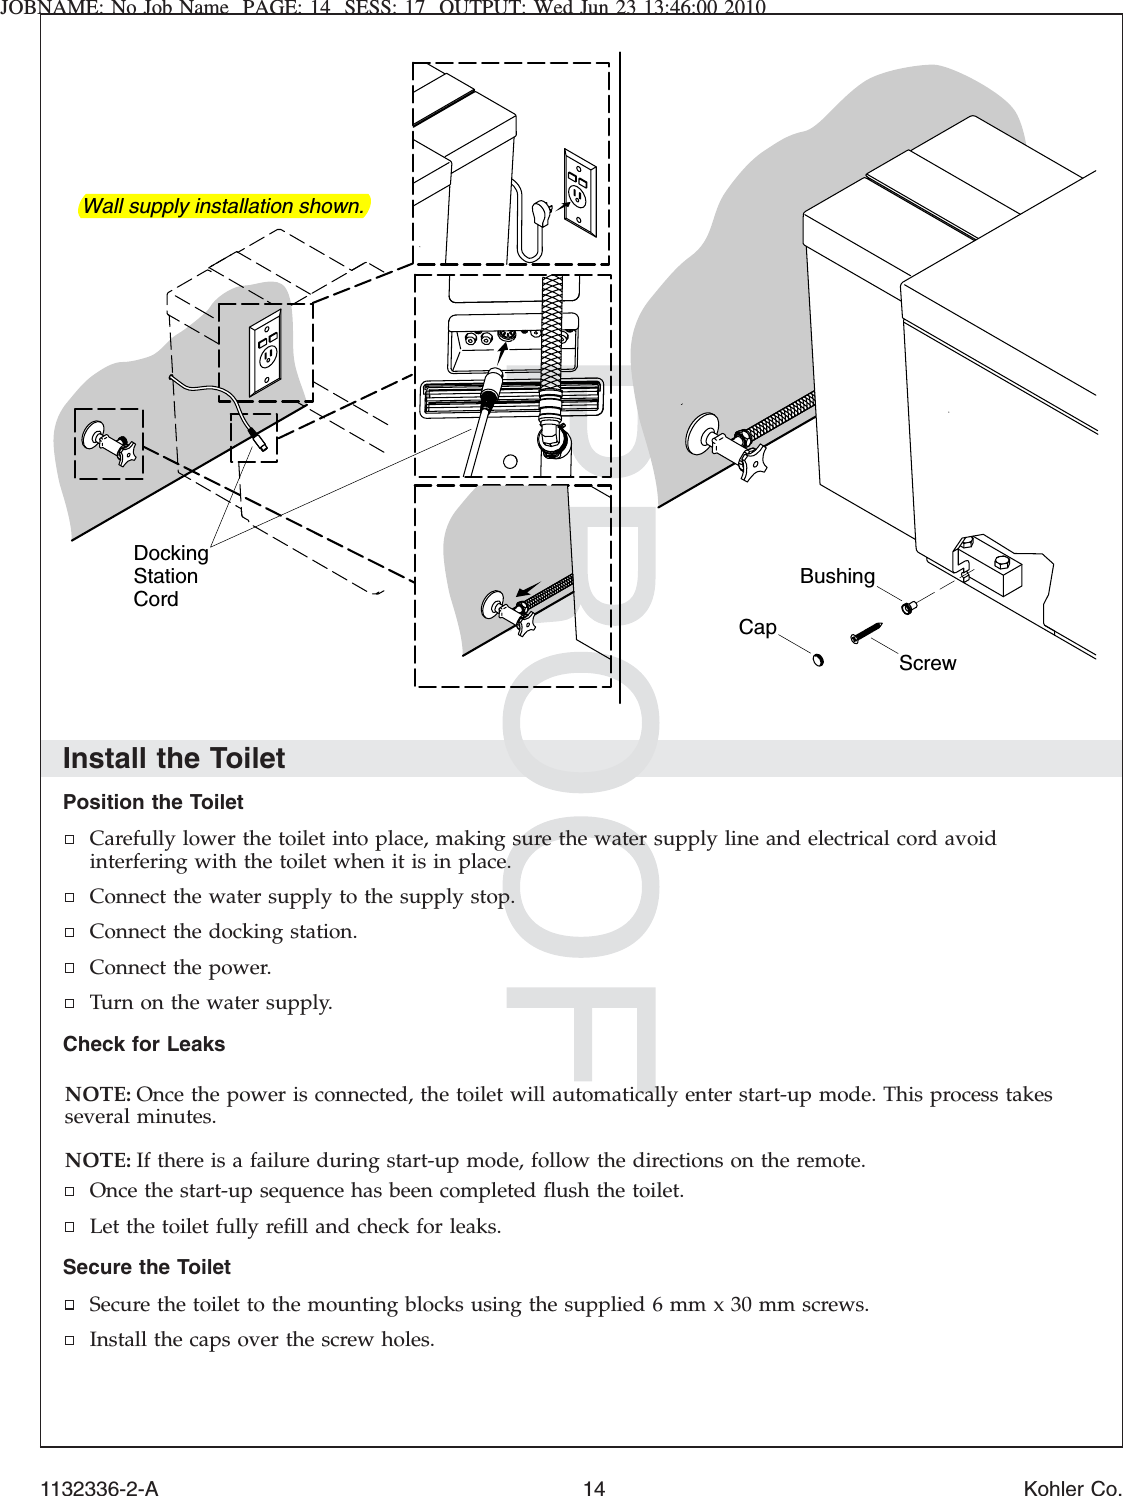 JOBNAME: No Job Name PAGE: 14 SESS: 17 OUTPUT: Wed Jun 23 13:46:00 2010Install the ToiletPosition the ToiletCarefully lower the toilet into place, making sure the water supply line and electrical cord avoidinterfering with the toilet when it is in place.Connect the water supply to the supply stop.Connect the docking station.Connect the power.Turn on the water supply.Check for LeaksNOTE: Once the power is connected, the toilet will automatically enter start-up mode. This process takesseveral minutes.NOTE: If there is a failure during start-up mode, follow the directions on the remote.Once the start-up sequence has been completed ﬂush the toilet.Let the toilet fully reﬁll and check for leaks.Secure the ToiletSecure the toilet to the mounting blocks using the supplied 6 mm x 30 mm screws.Install the caps over the screw holes.CapScrewBushingWall supply installation shown.Docking Station Cord1132336-2-A 14 Kohler Co.